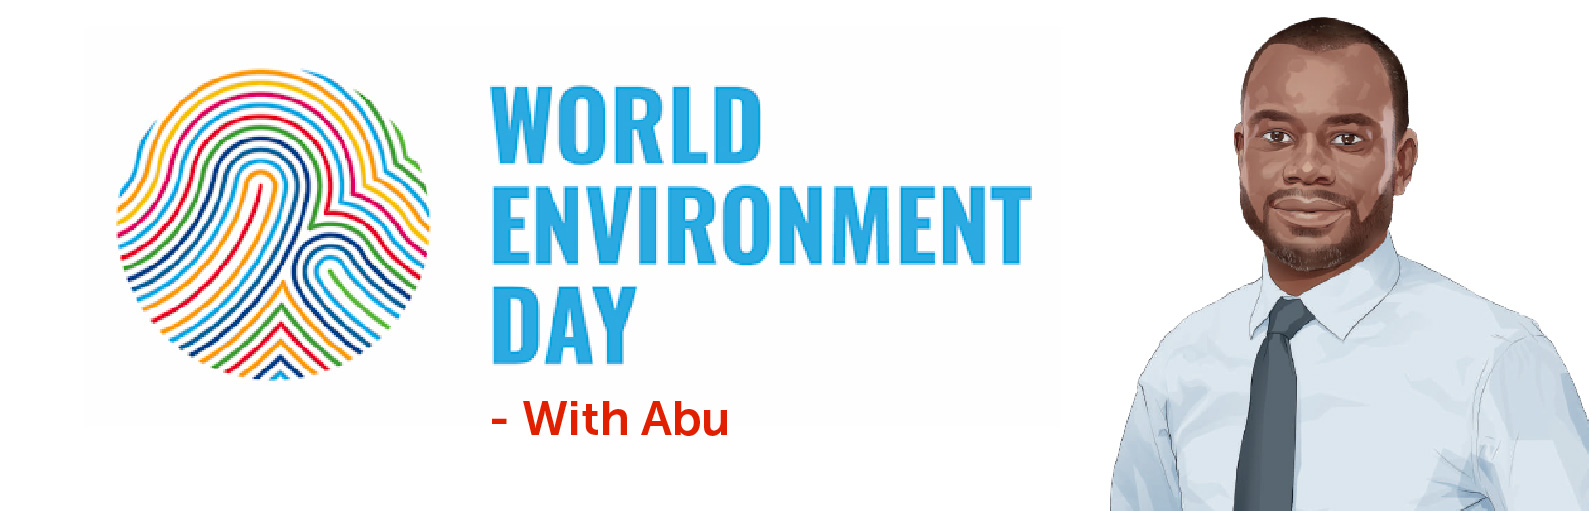 Image featuring World Environment Day logo with Abu